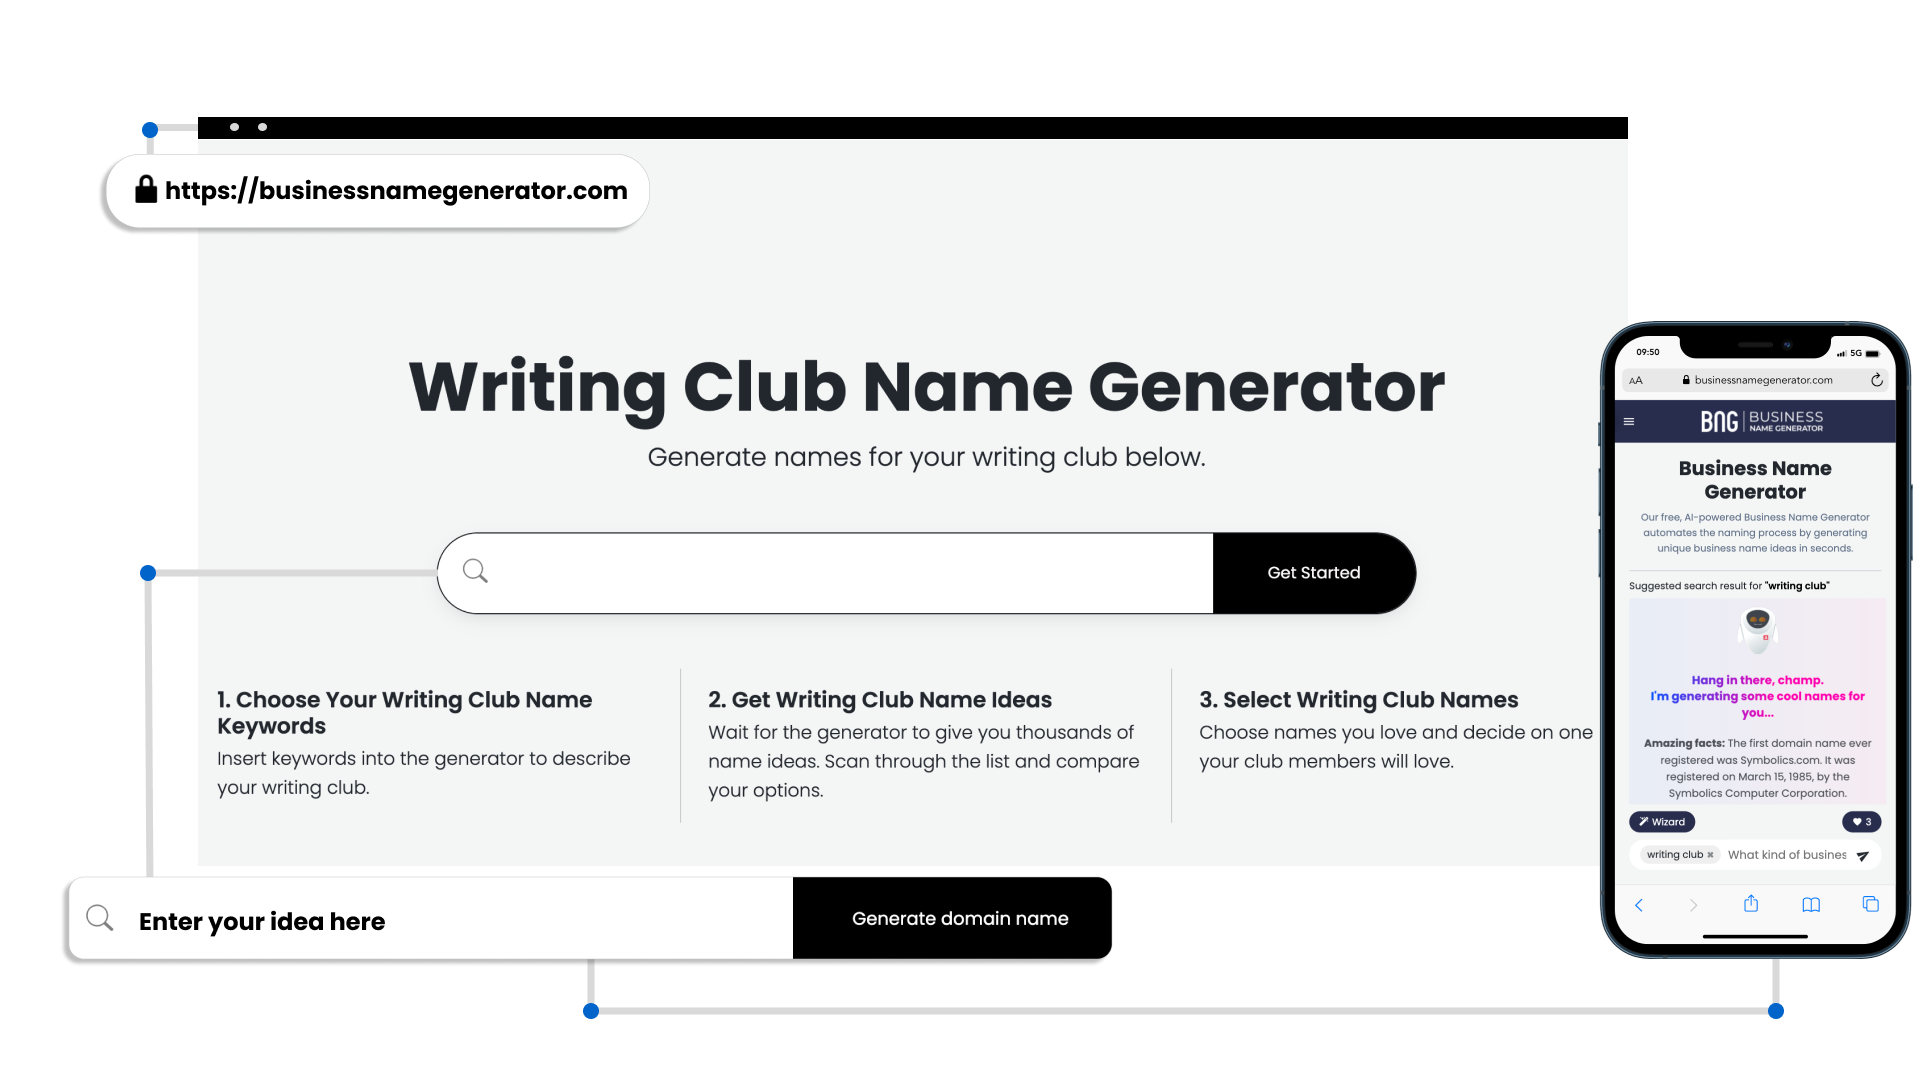 How to use our Writing Club Name Generator